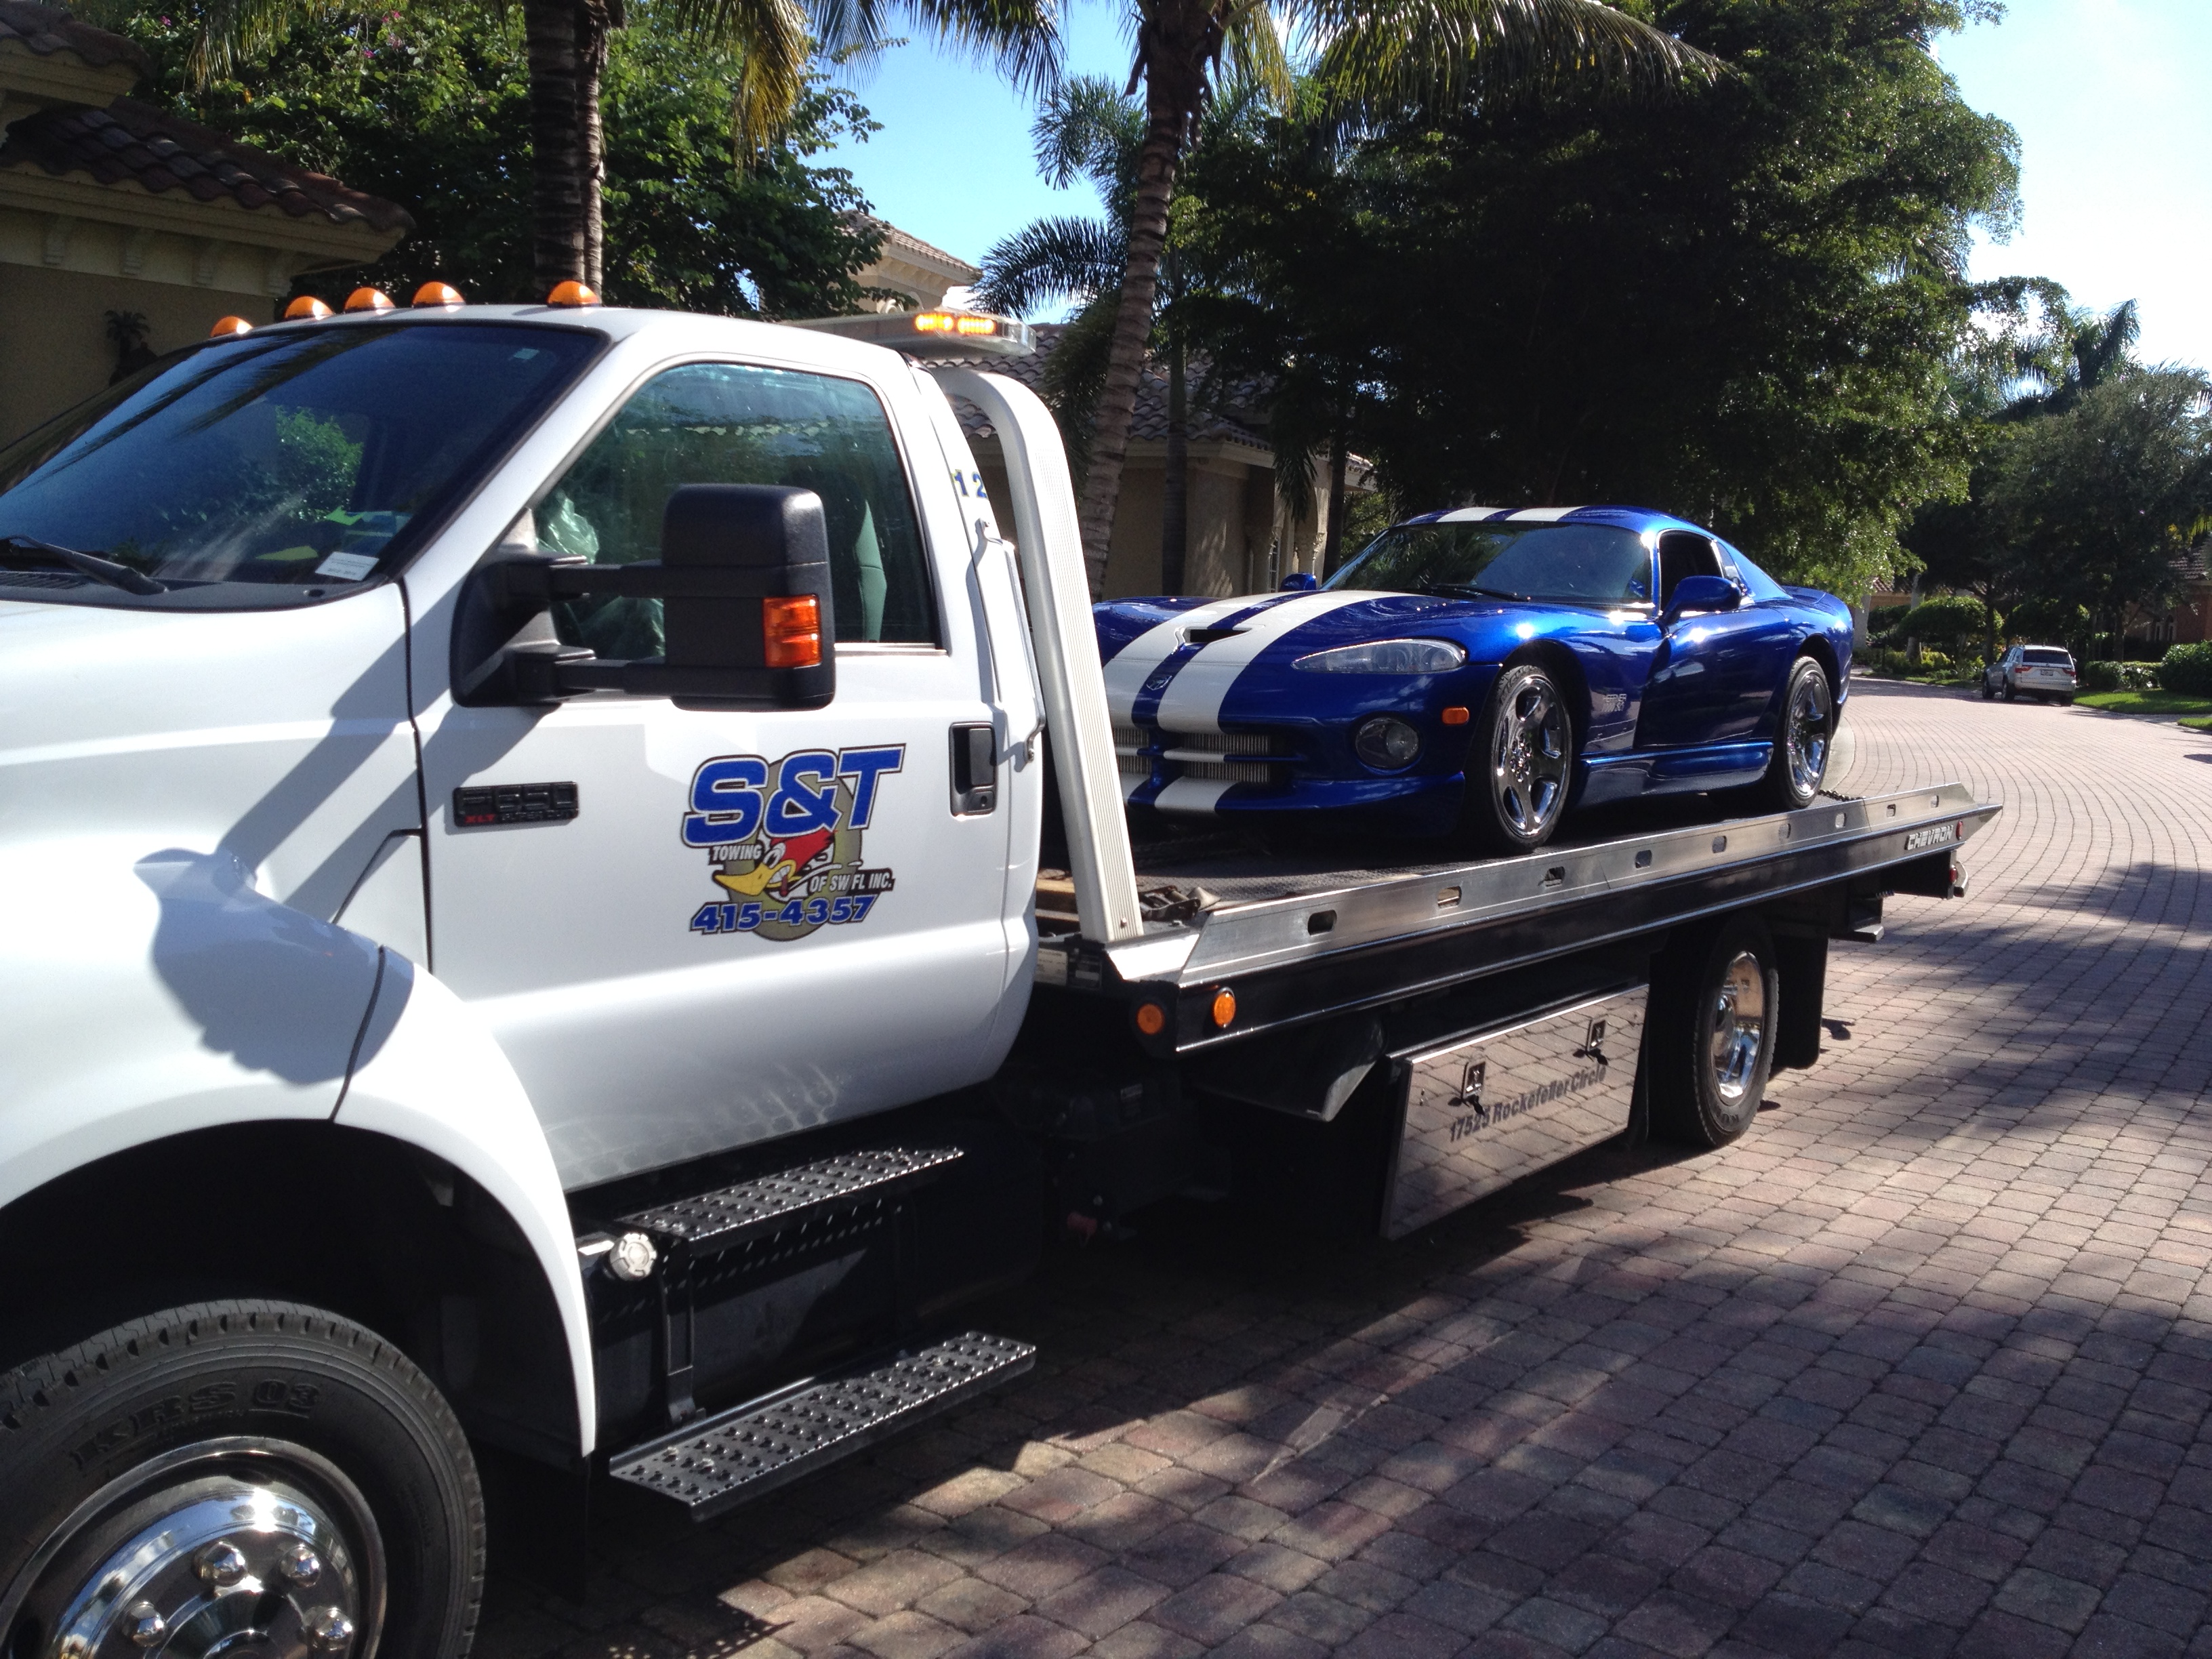 S&T offers professional flatbed towing service for all vehicles in Fort Myers, Estero, and Bonita Springs, FL